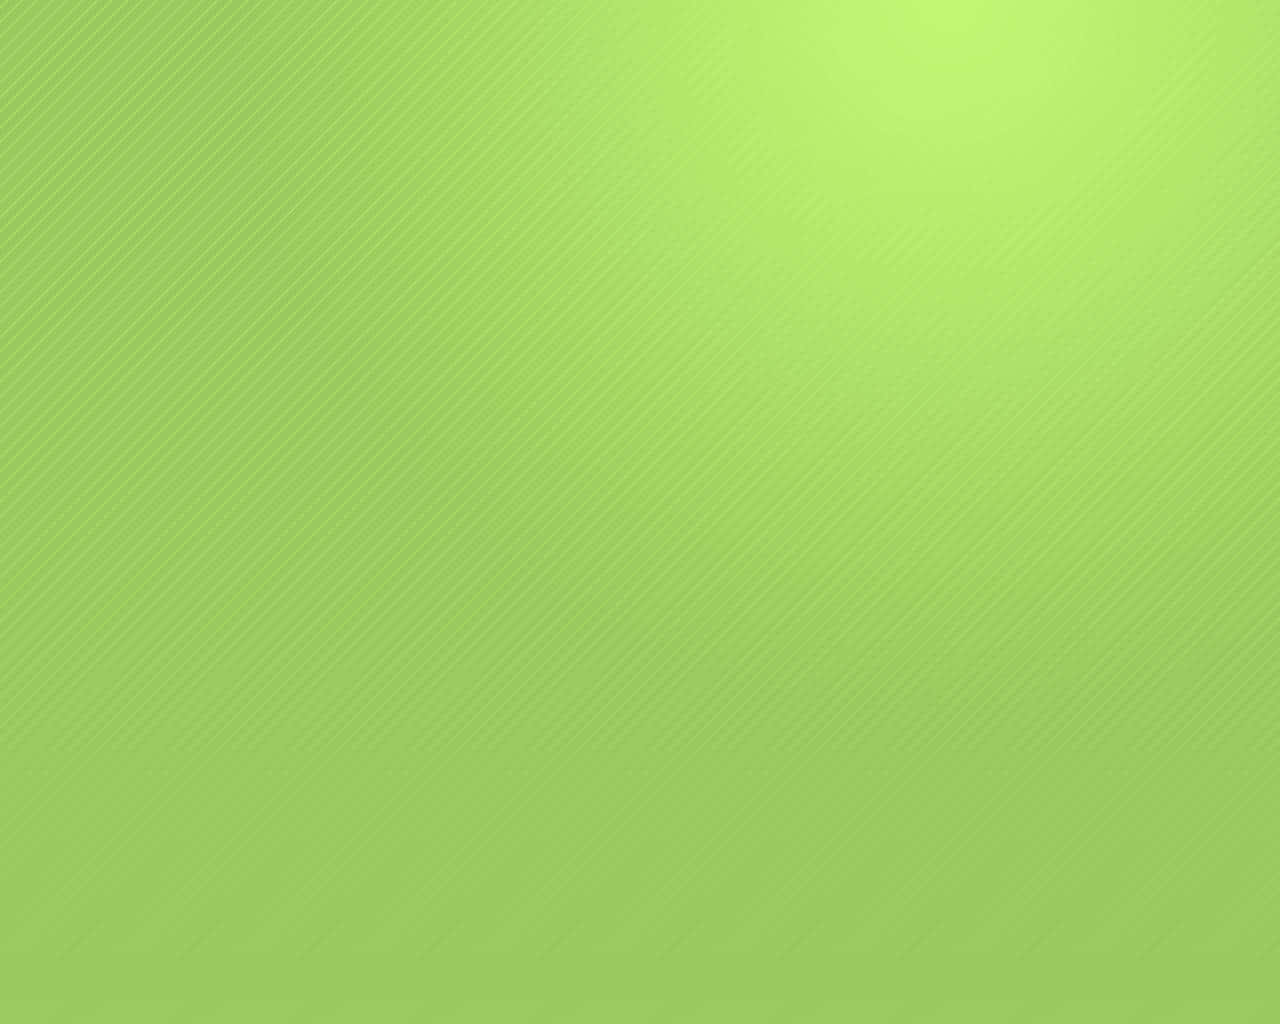 Green Background Hd Outlet  anuariocidoborg 1691532721